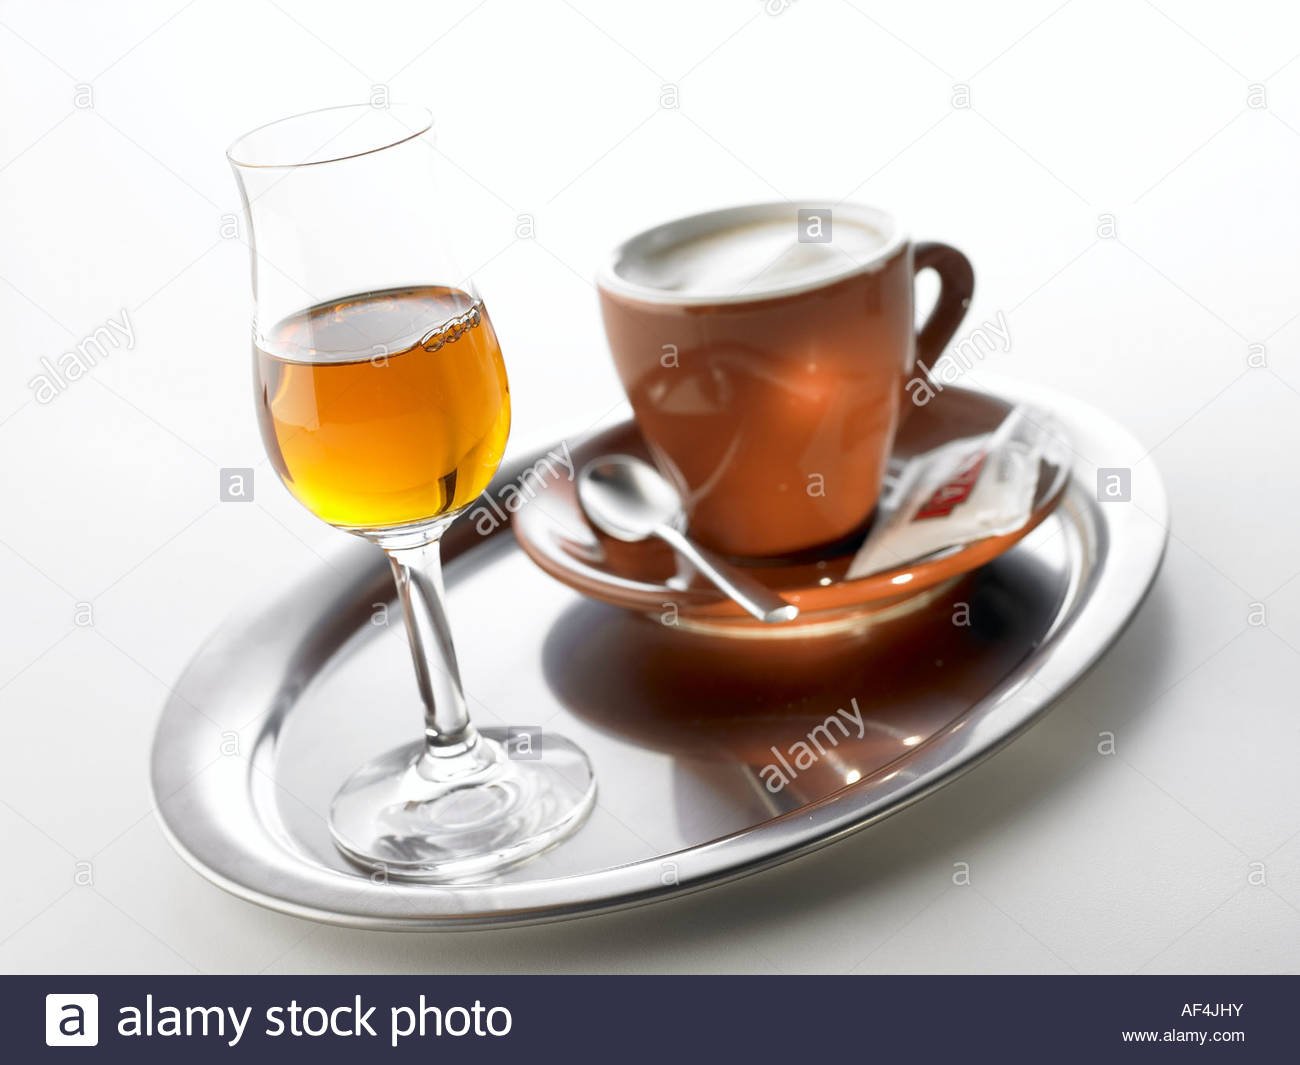 grappa-and-espresso-on-tray-AF4JHY.jpg